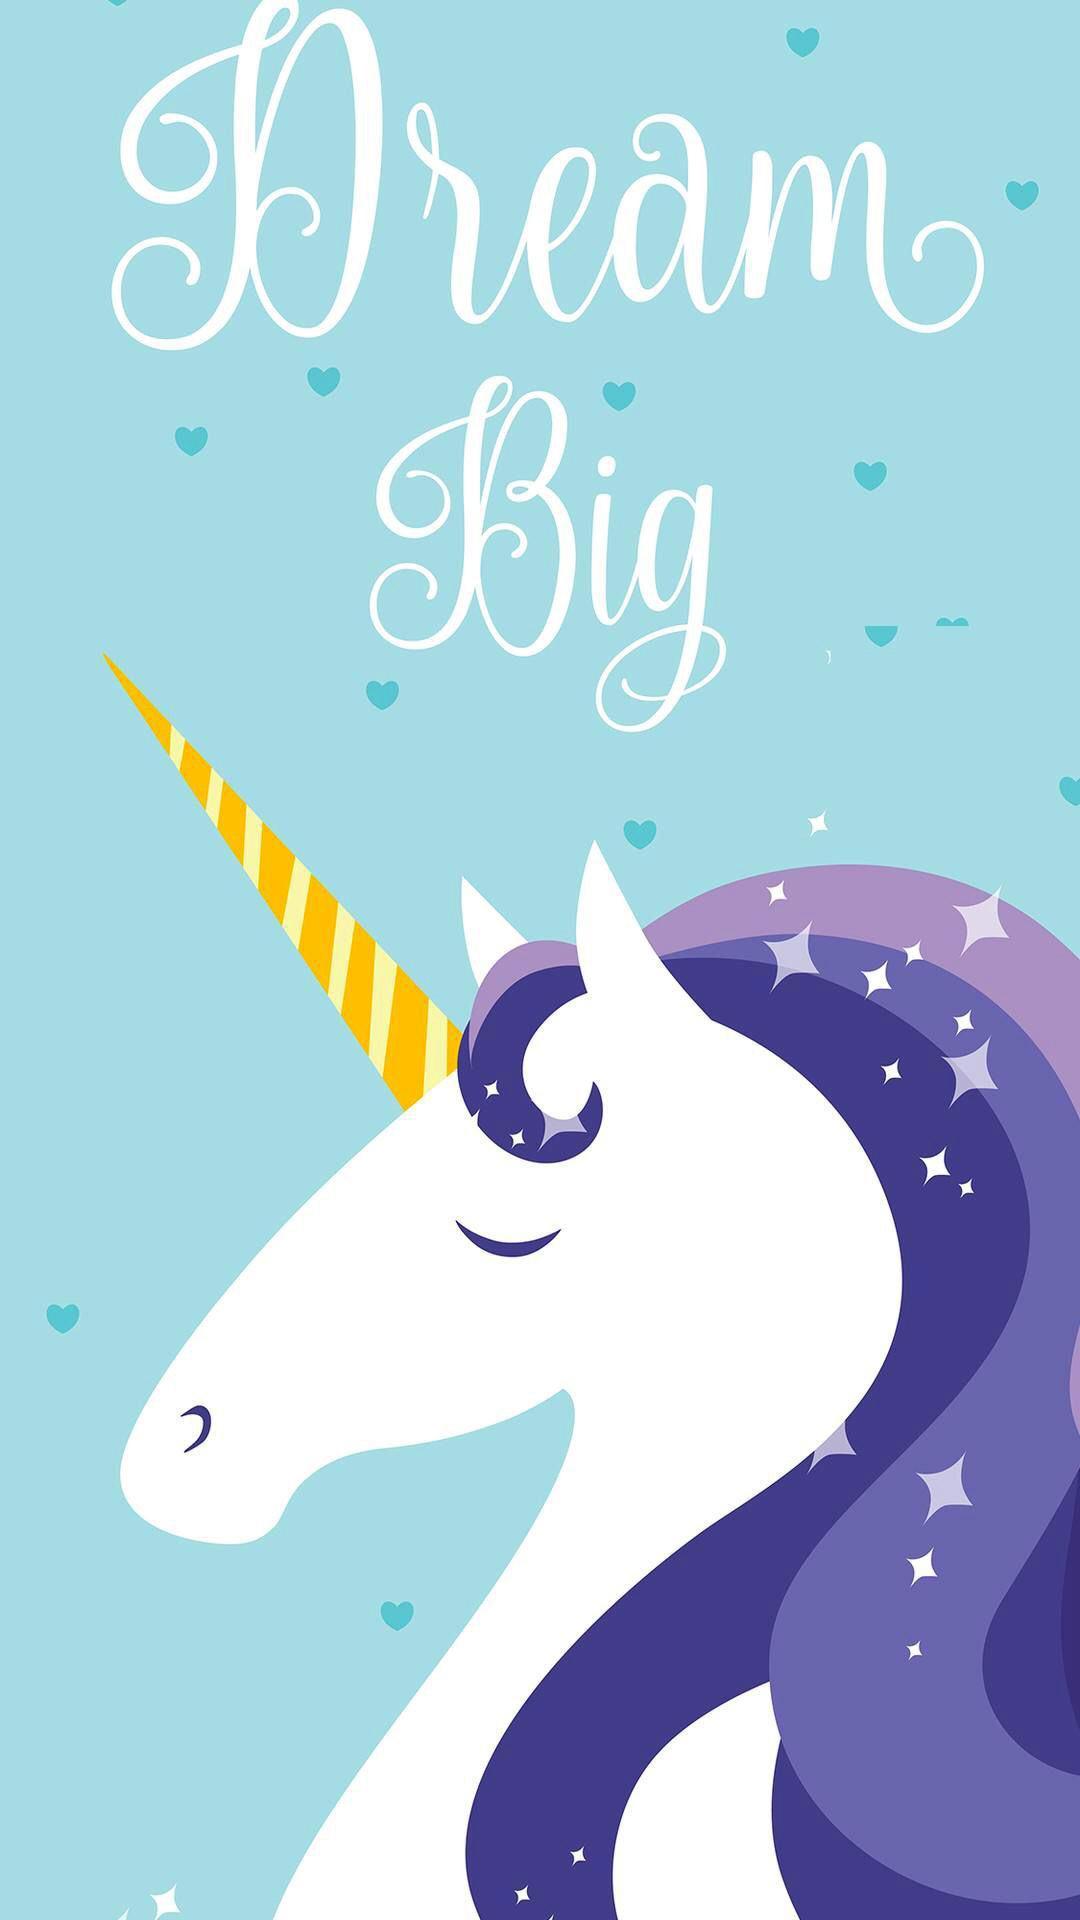 Unicorn Wallpaper (4K Ultra HD) for Android